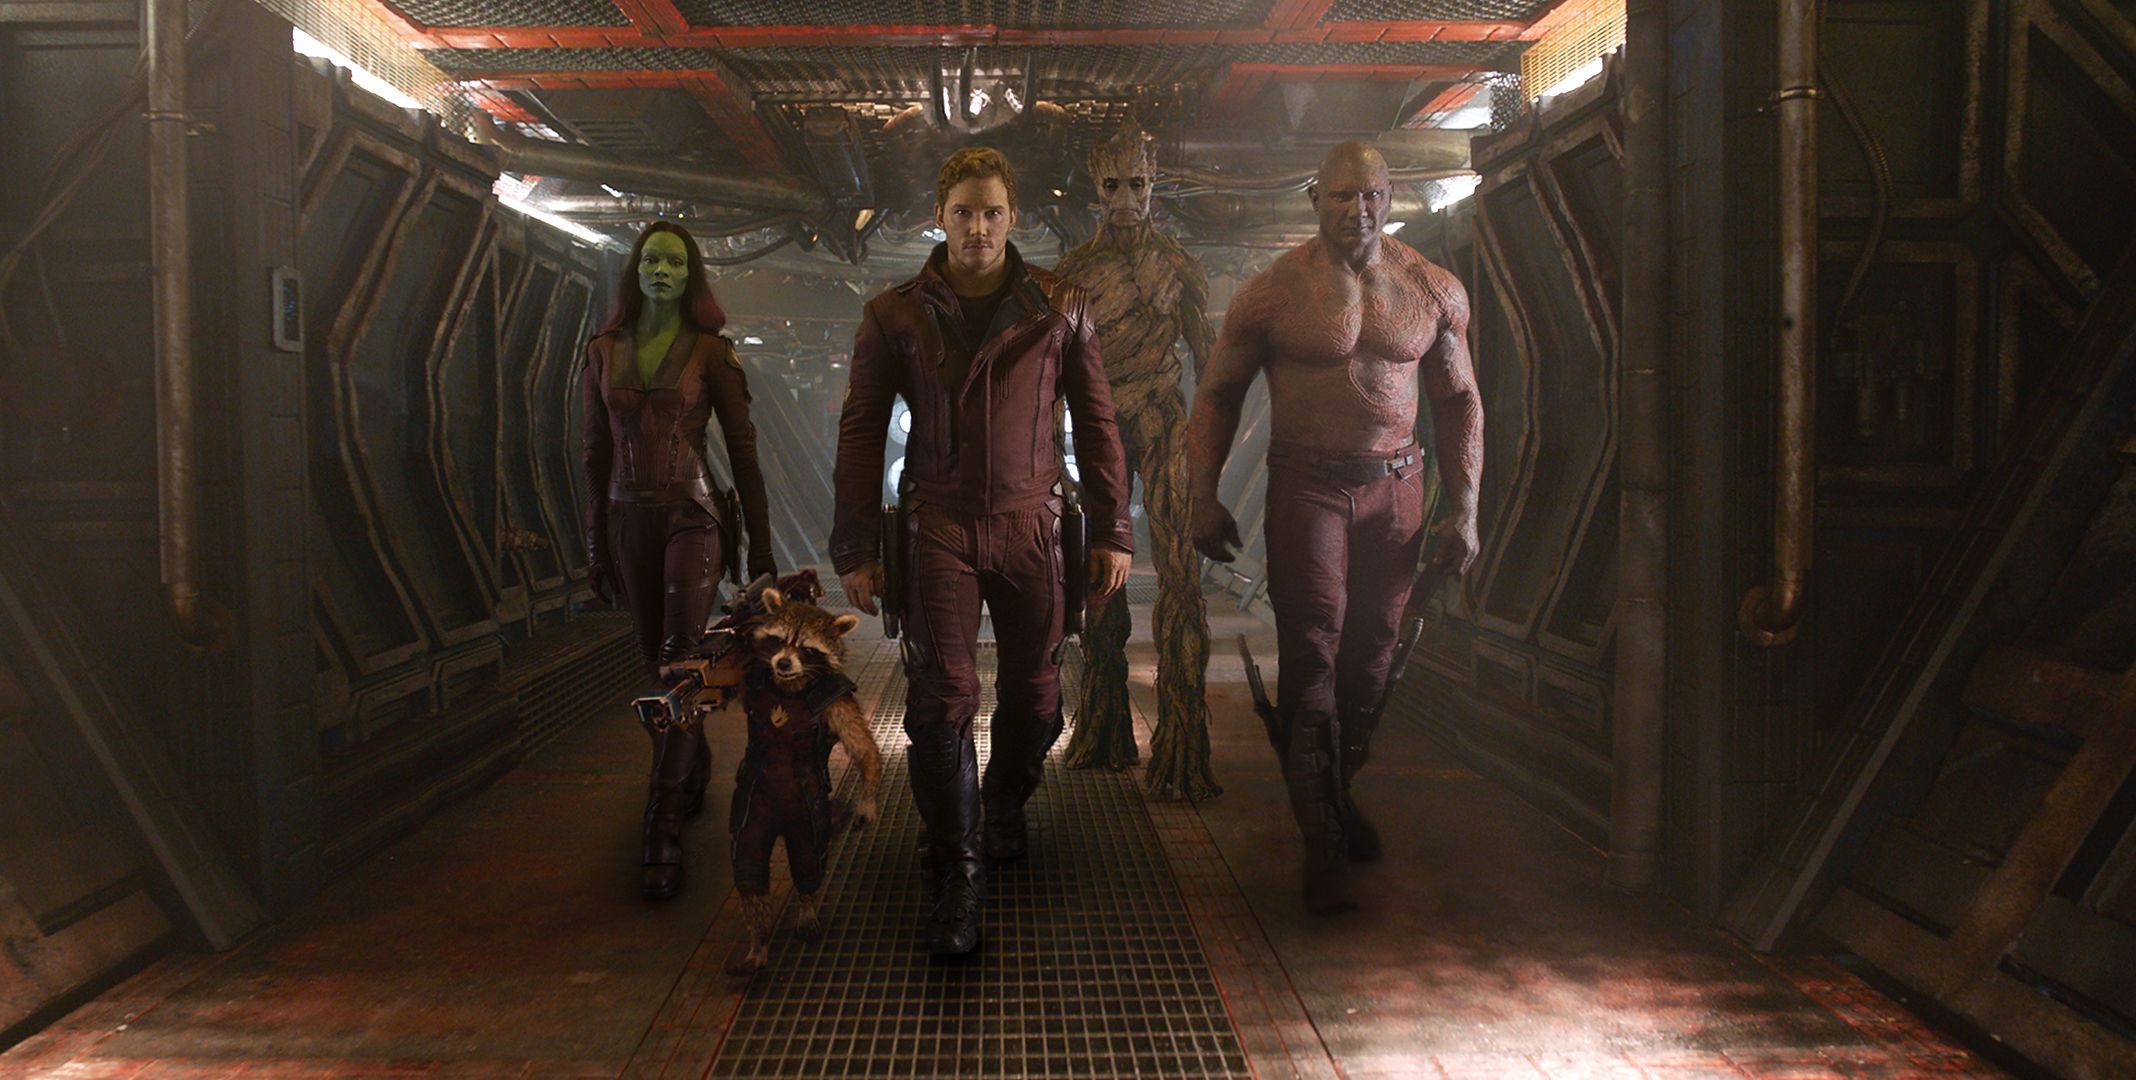 Guardians of the Galaxy Team Photo (Strutting Together)